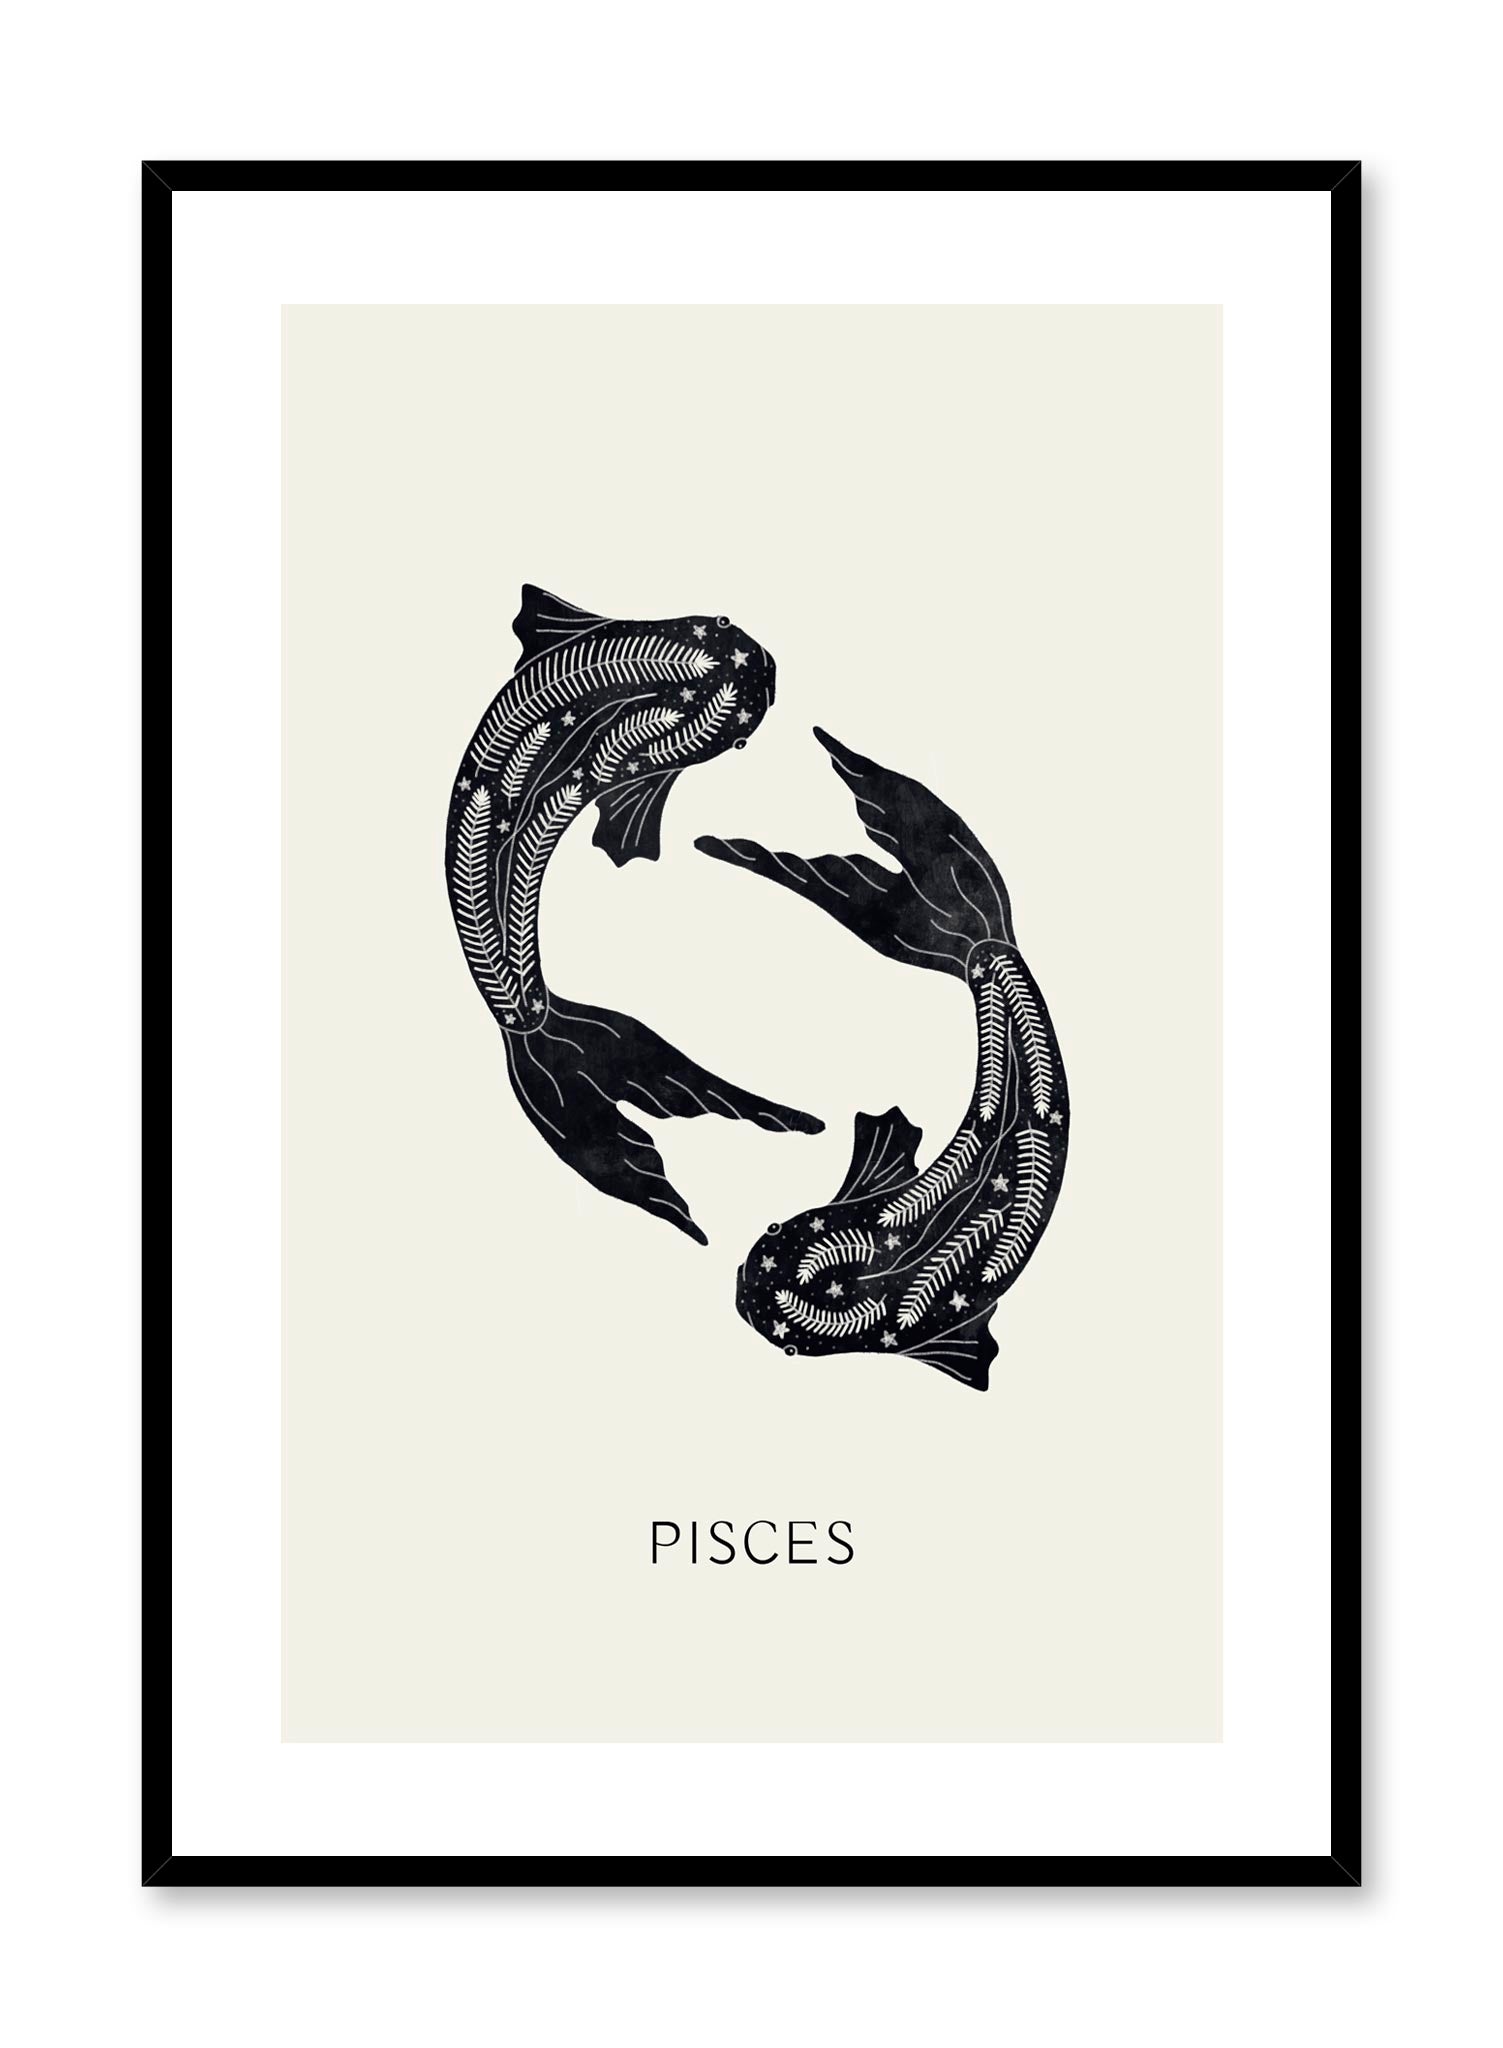 Celestial poster by Opposite Wall with illustration of Pisces horoscope symbol